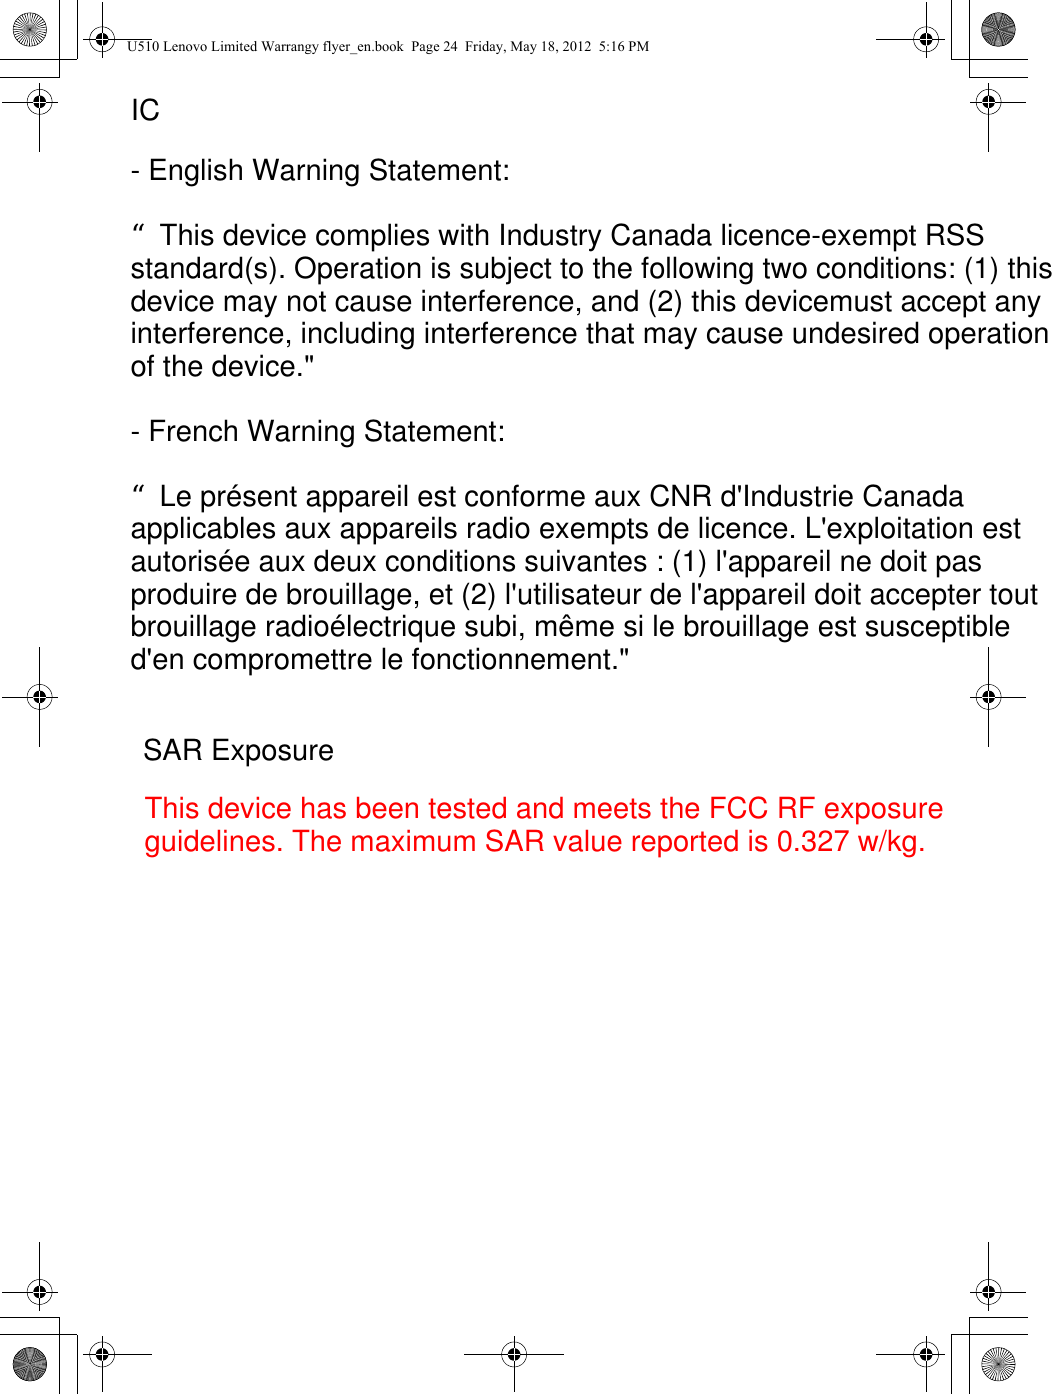 U510 Lenovo Limited Warrangy flyer_en.book  Page 24  Friday, May 18, 2012  5:16 PMICThis device has been tested and meets the FCC RF exposure guidelines. The maximum SAR value reported is 0.327 w/kg.- English Warning Statement:  “This device complies with Industry Canada licence-exempt RSS standard(s). Operation is subject to the following two conditions: (1) this device may not cause interference, and (2) this devicemust accept any interference, including interference that may cause undesired operation of the device.&quot;  - French Warning Statement:  “Le présent appareil est conforme aux CNR d&apos;Industrie Canada applicables aux appareils radio exempts de licence. L&apos;exploitation est autorisée aux deux conditions suivantes : (1) l&apos;appareil ne doit pas produire de brouillage, et (2) l&apos;utilisateur de l&apos;appareil doit accepter tout brouillage radioélectrique subi, même si le brouillage est susceptible d&apos;en compromettre le fonctionnement.&quot;SAR Exposure